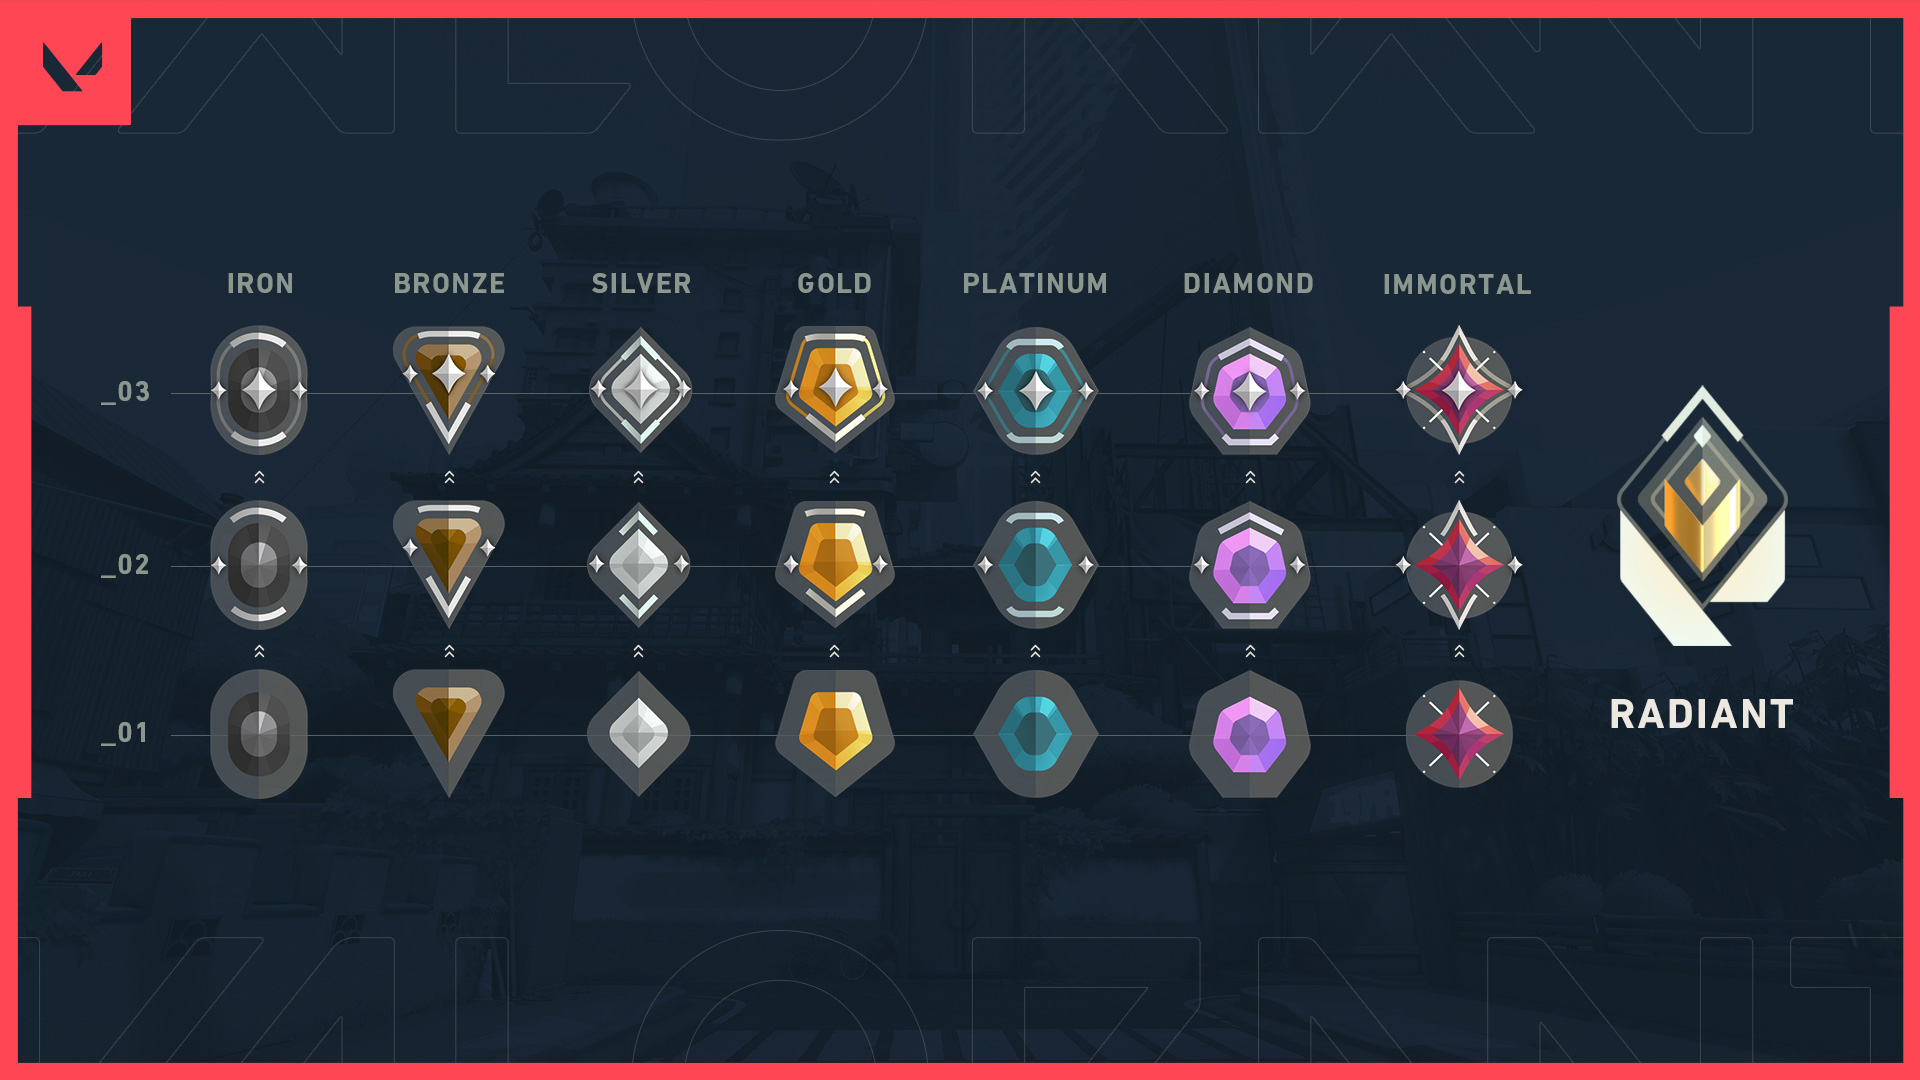 Screenshot of the different ranks in Valorant